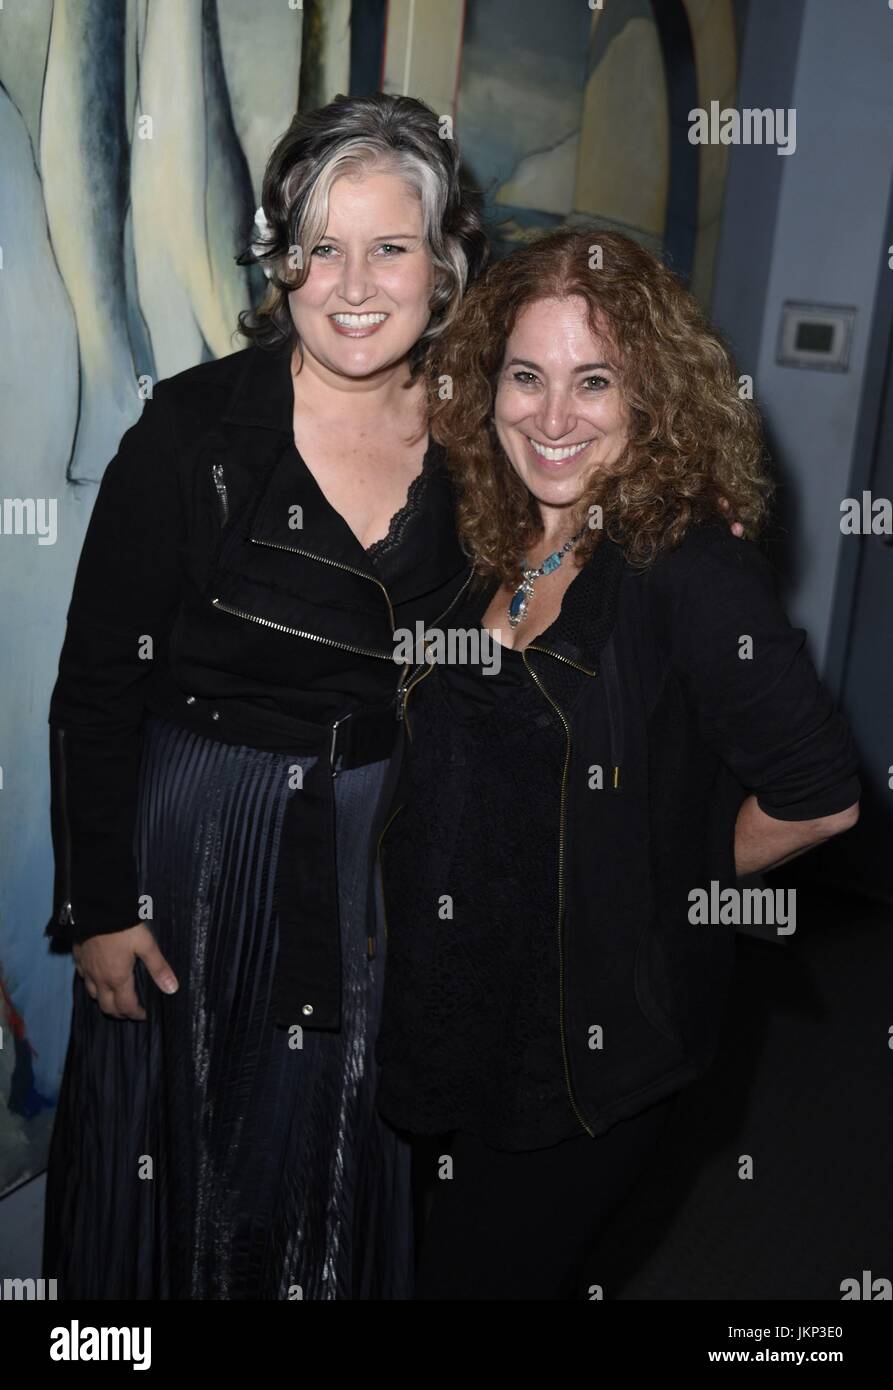 New York, NY, USA. 24th July, 2017. Paula Cole, Laura B. Whitmore in attendance for BackStory Events and Parade Magazine Present: An Intimate Evening of Conversation and Music with Paula Cole, The Cutting Room, New York, NY July 24, 2017. Credit: Derek Storm/Everett Collection/Alamy Live News Stock Photo